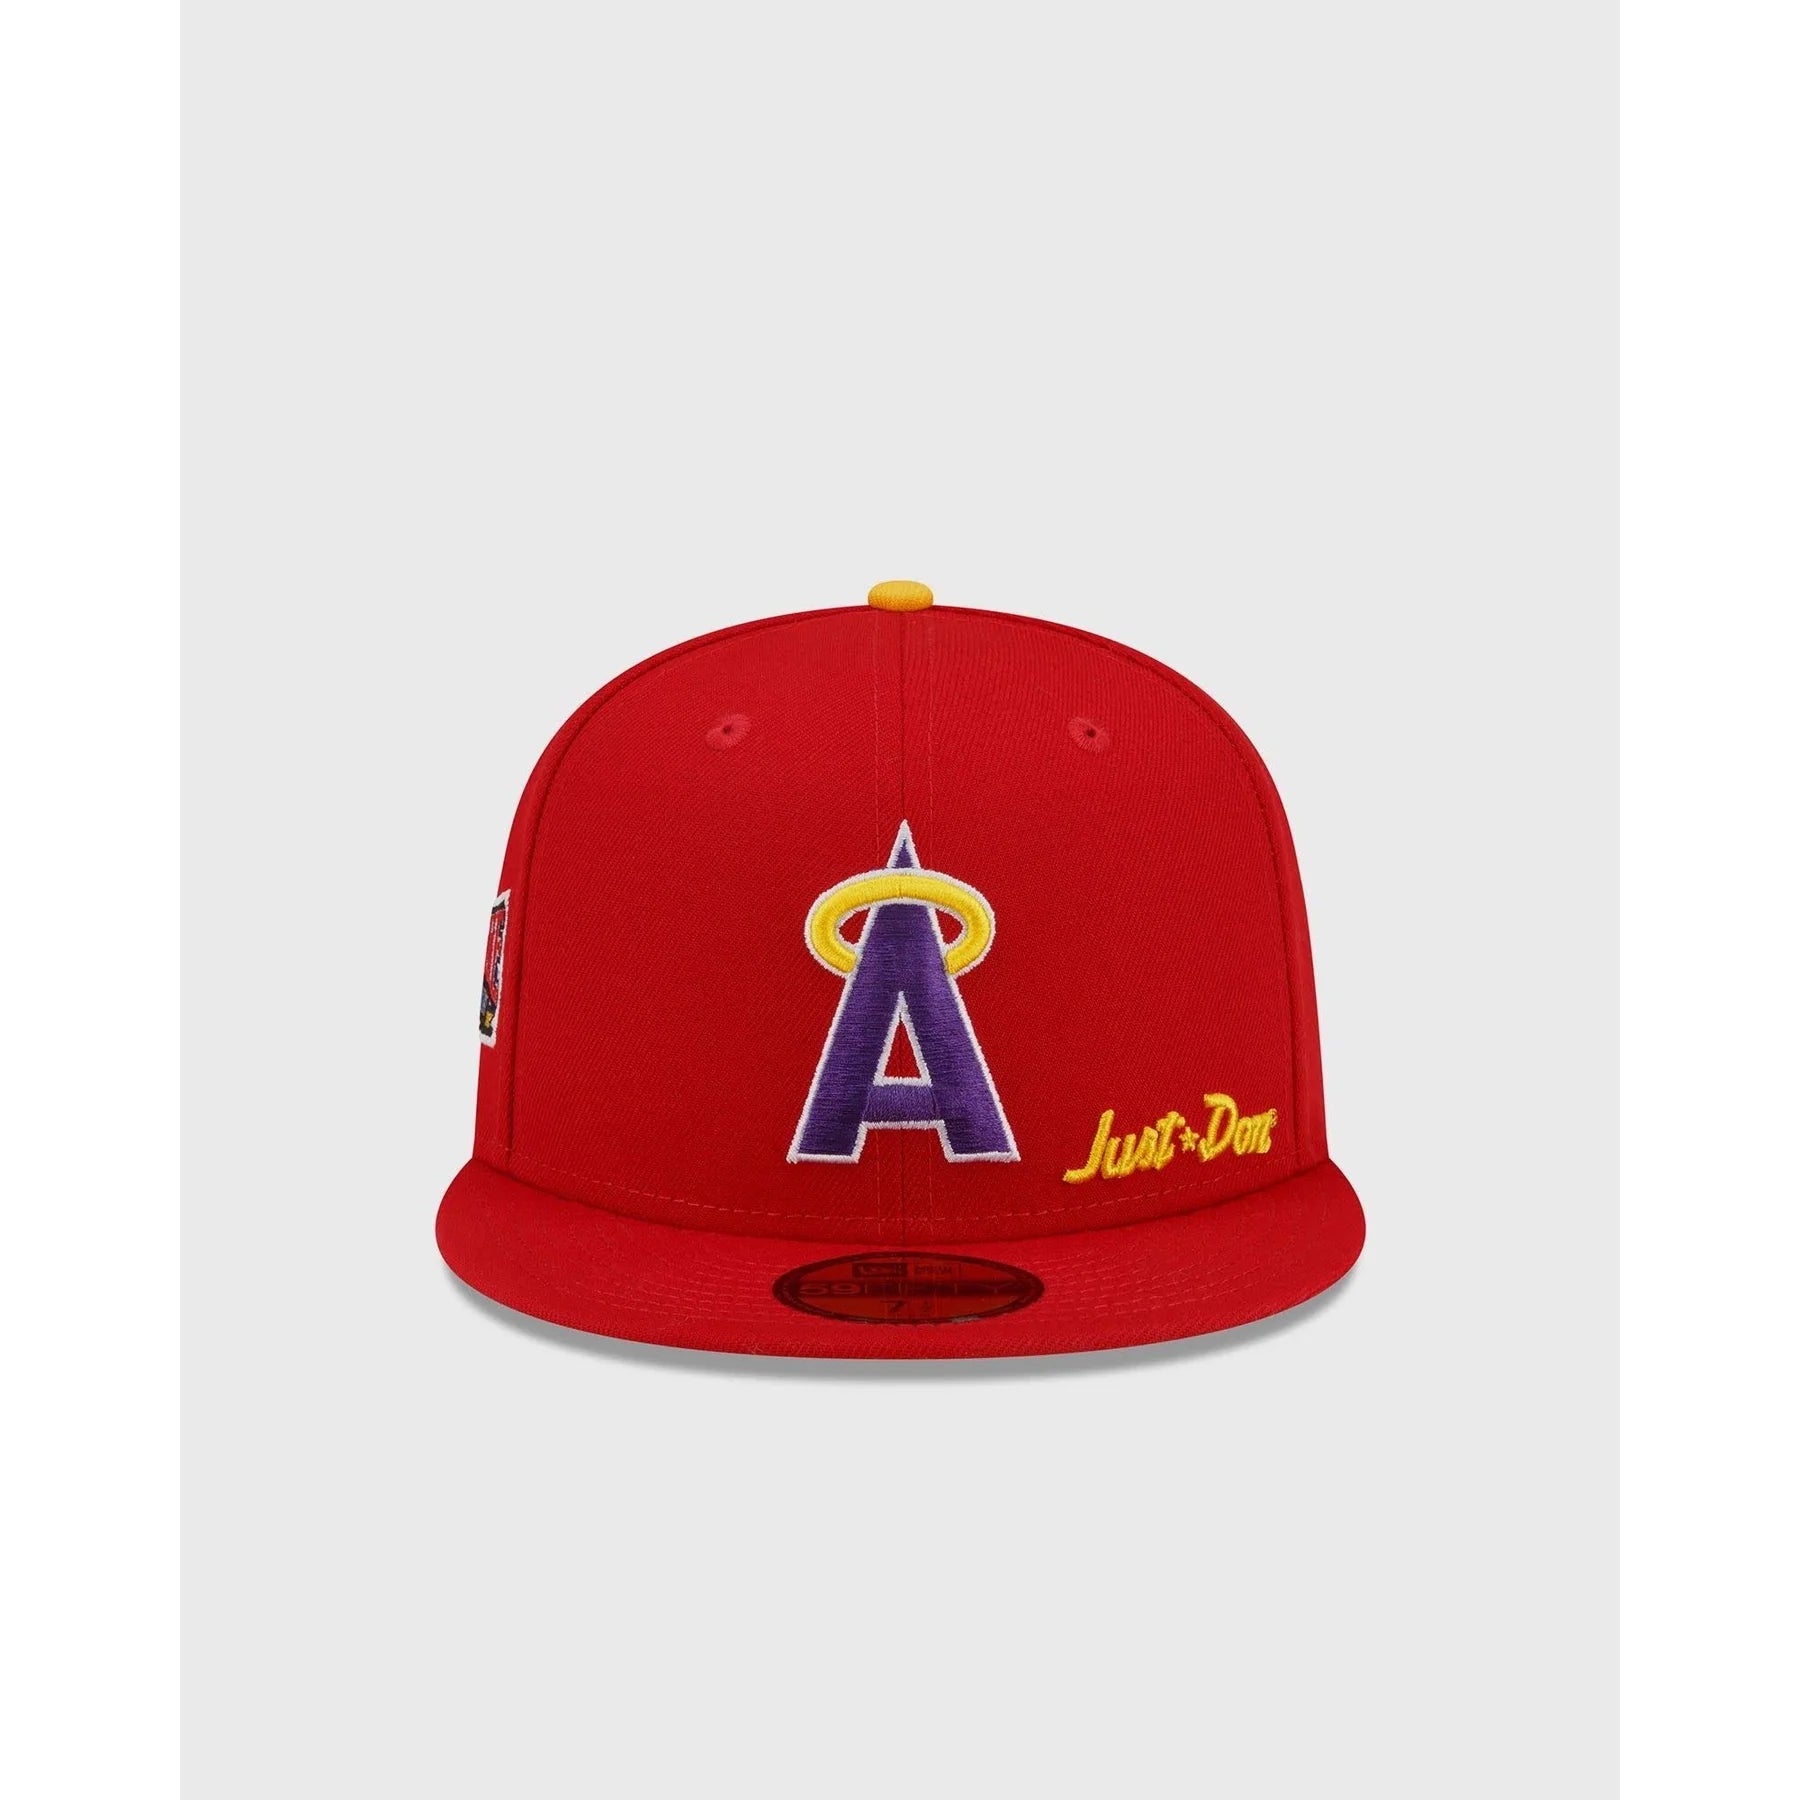 NEW ERA X JUST DON LOS ANGELES ANGELS FITTED CAP - RepKings